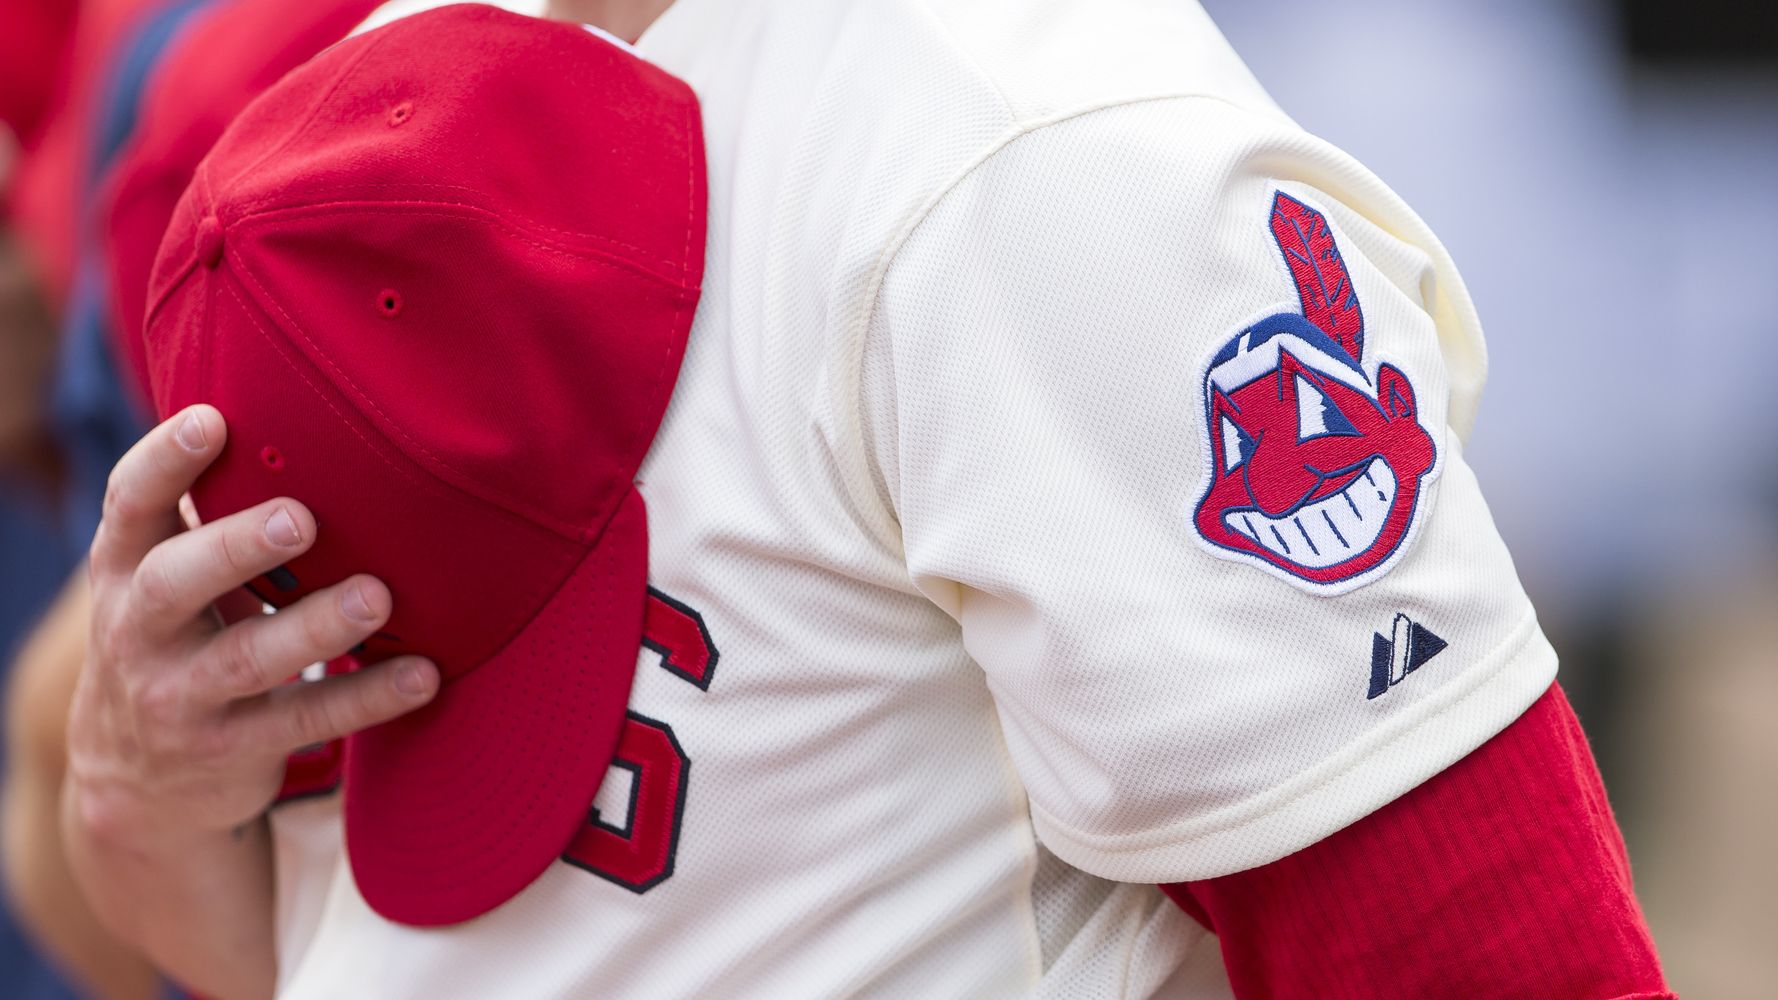 Chief Wahoo protest will go on despite removal from jerseys